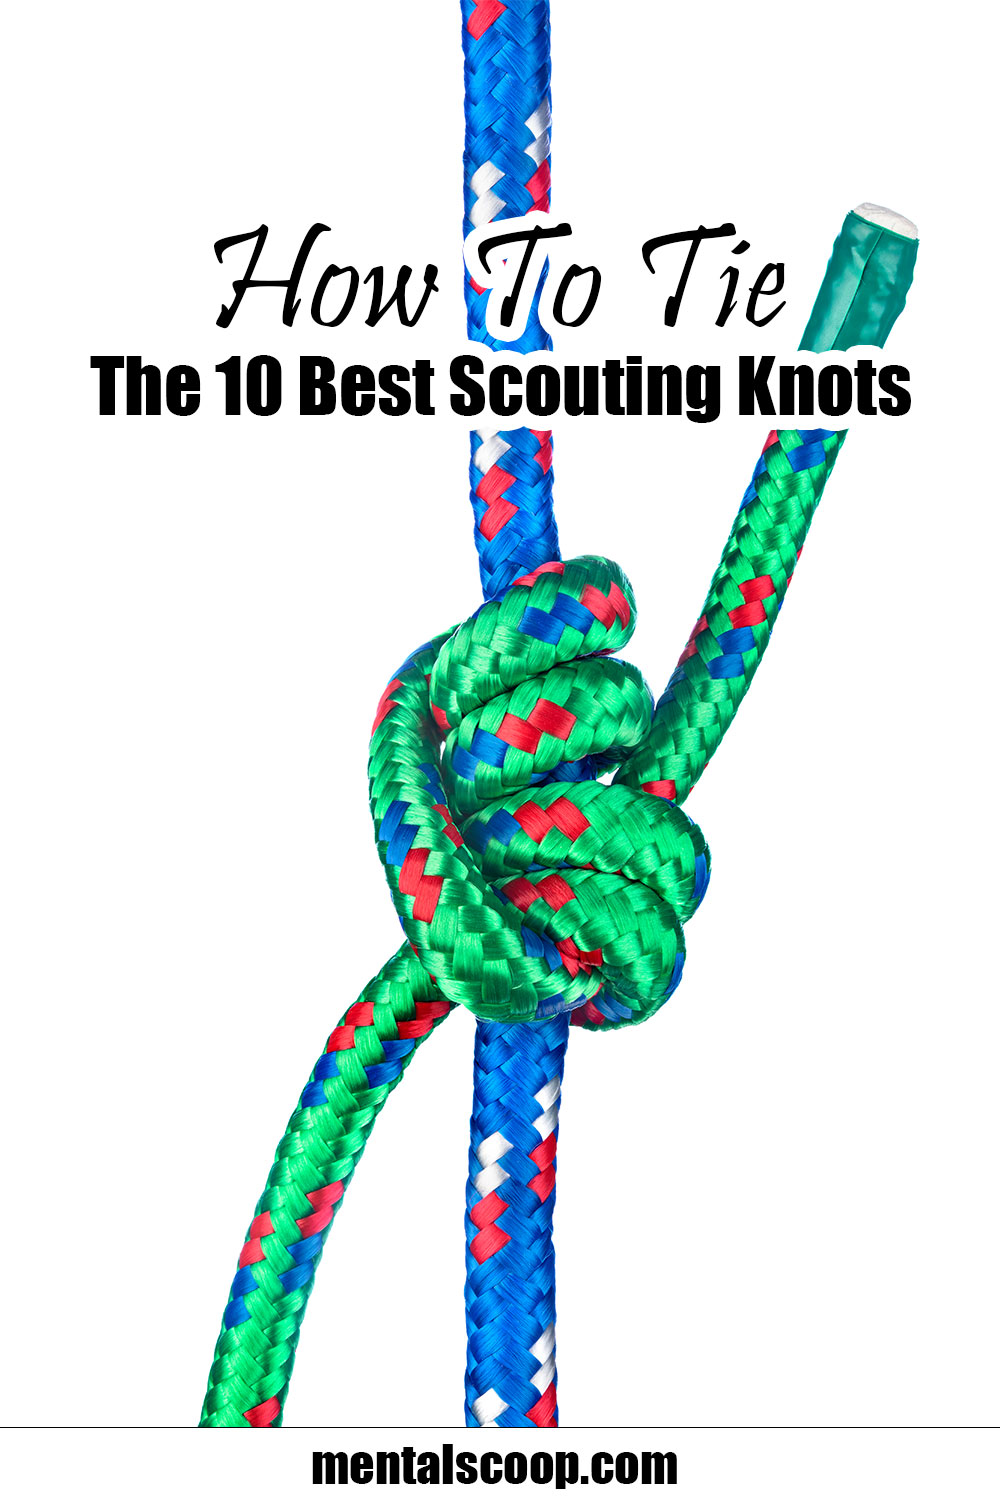 How To Tie The 10 Best Scouting Knots - Mental Scoop